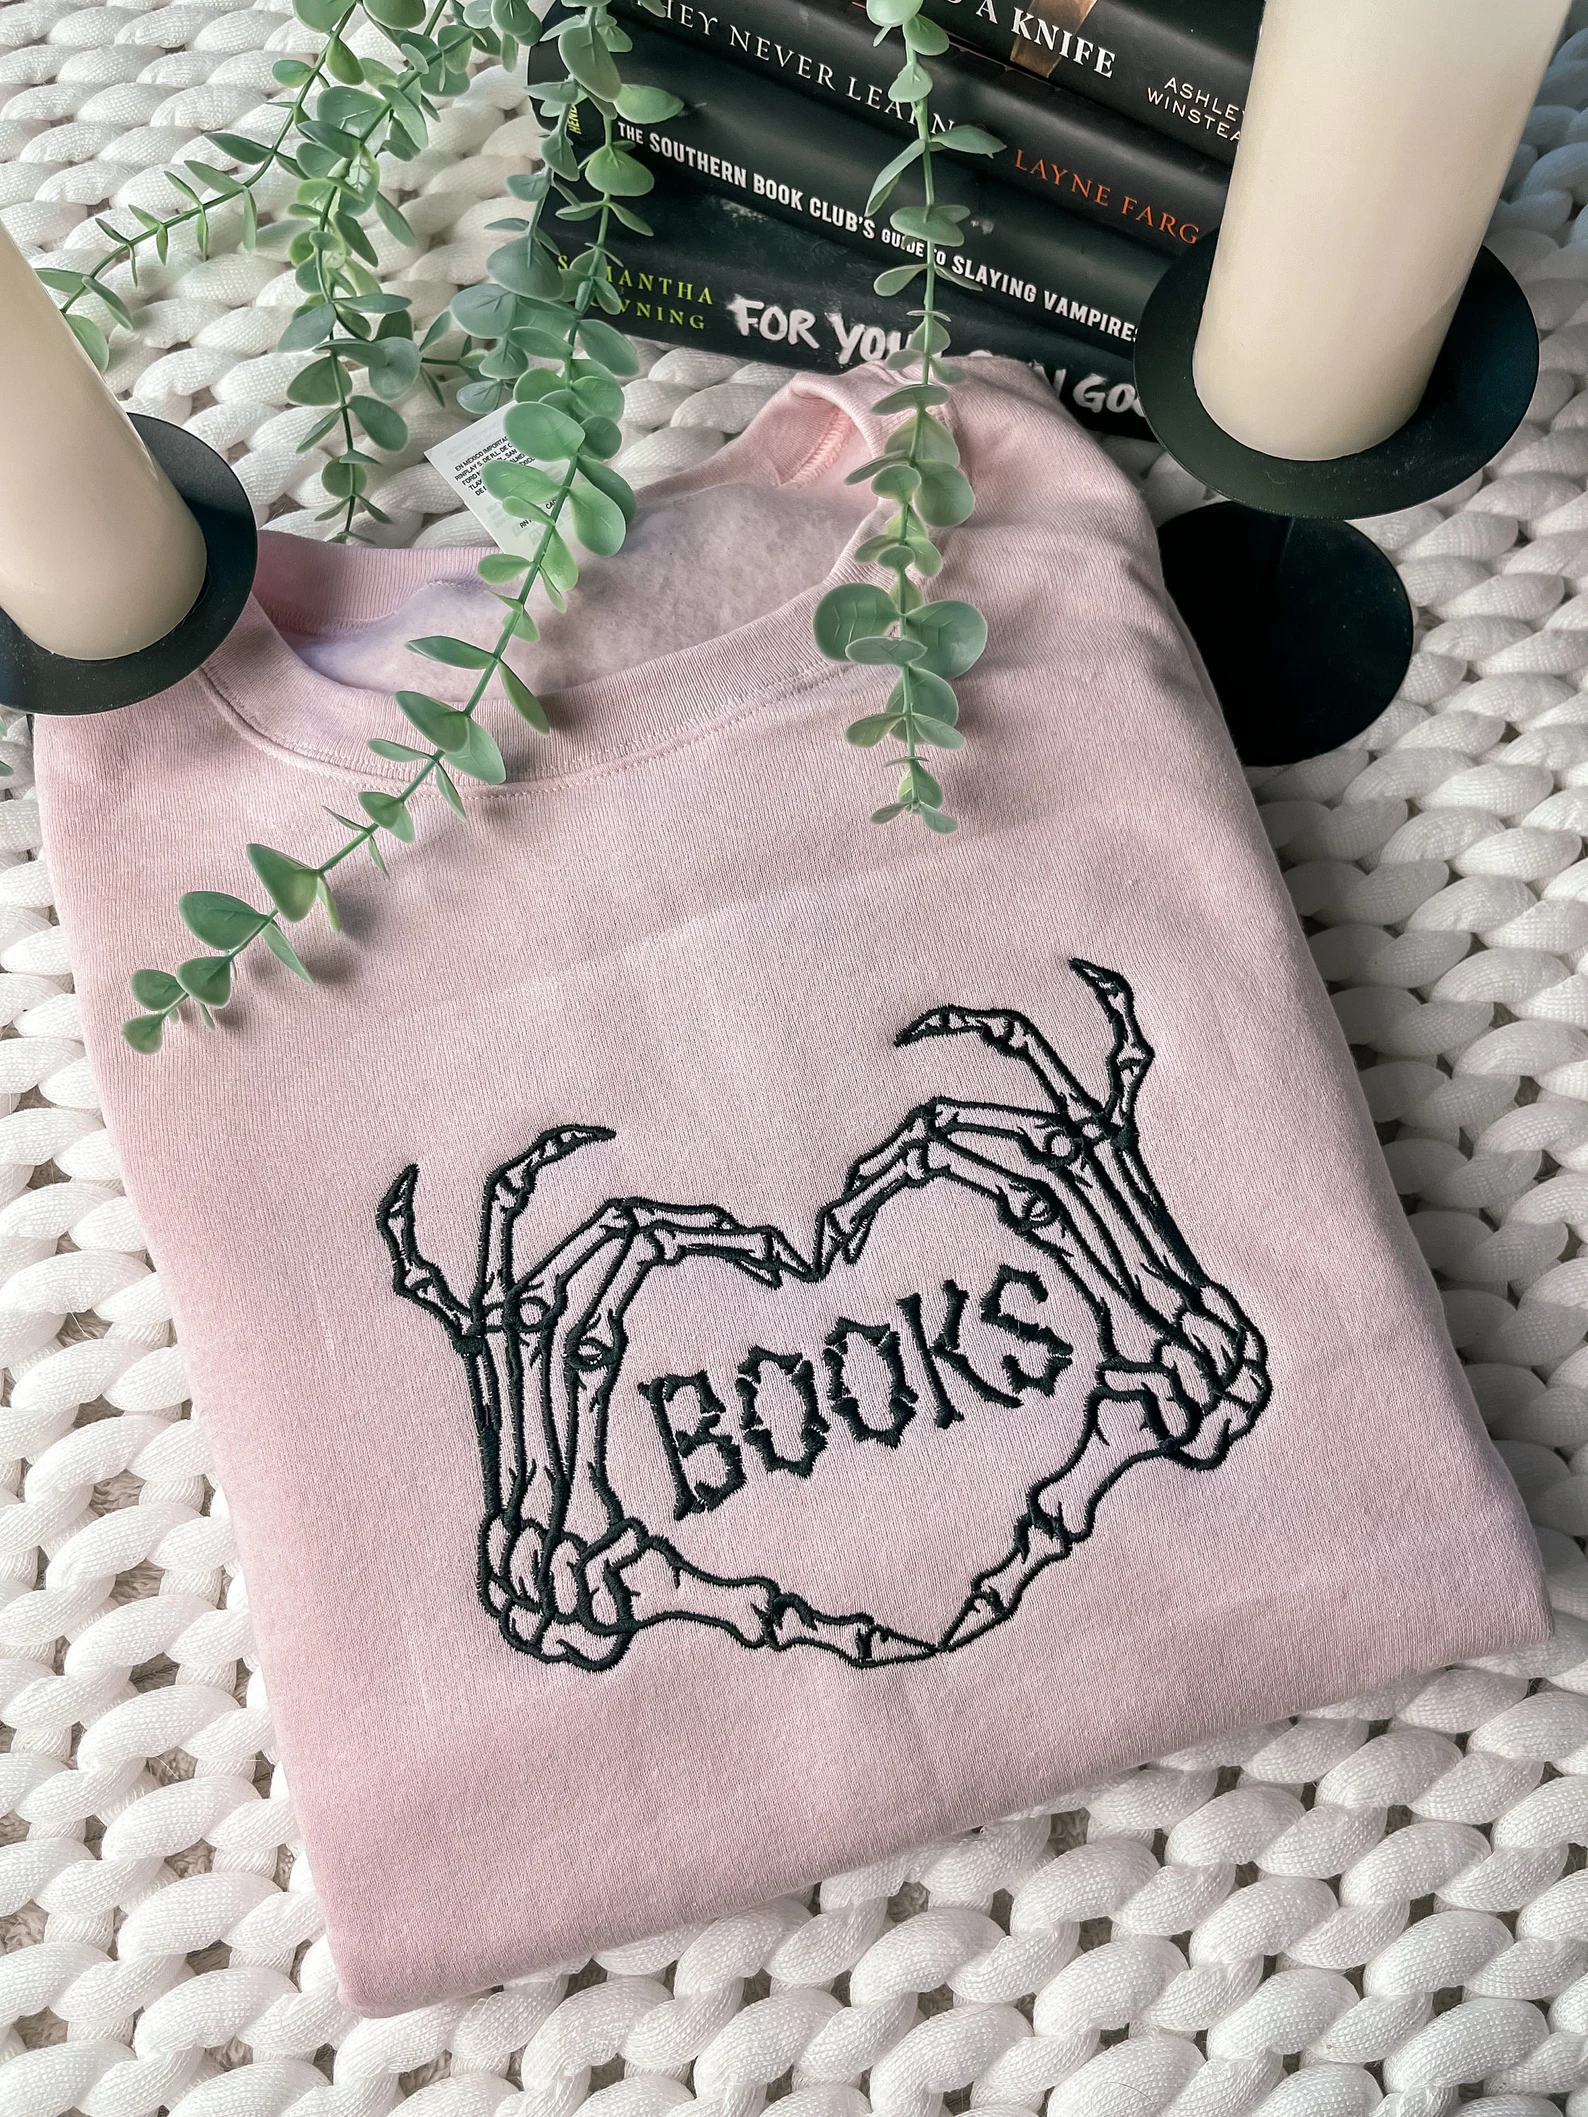 pink sweatshirt with he word "books" between two skeleton hands making a heart shape.